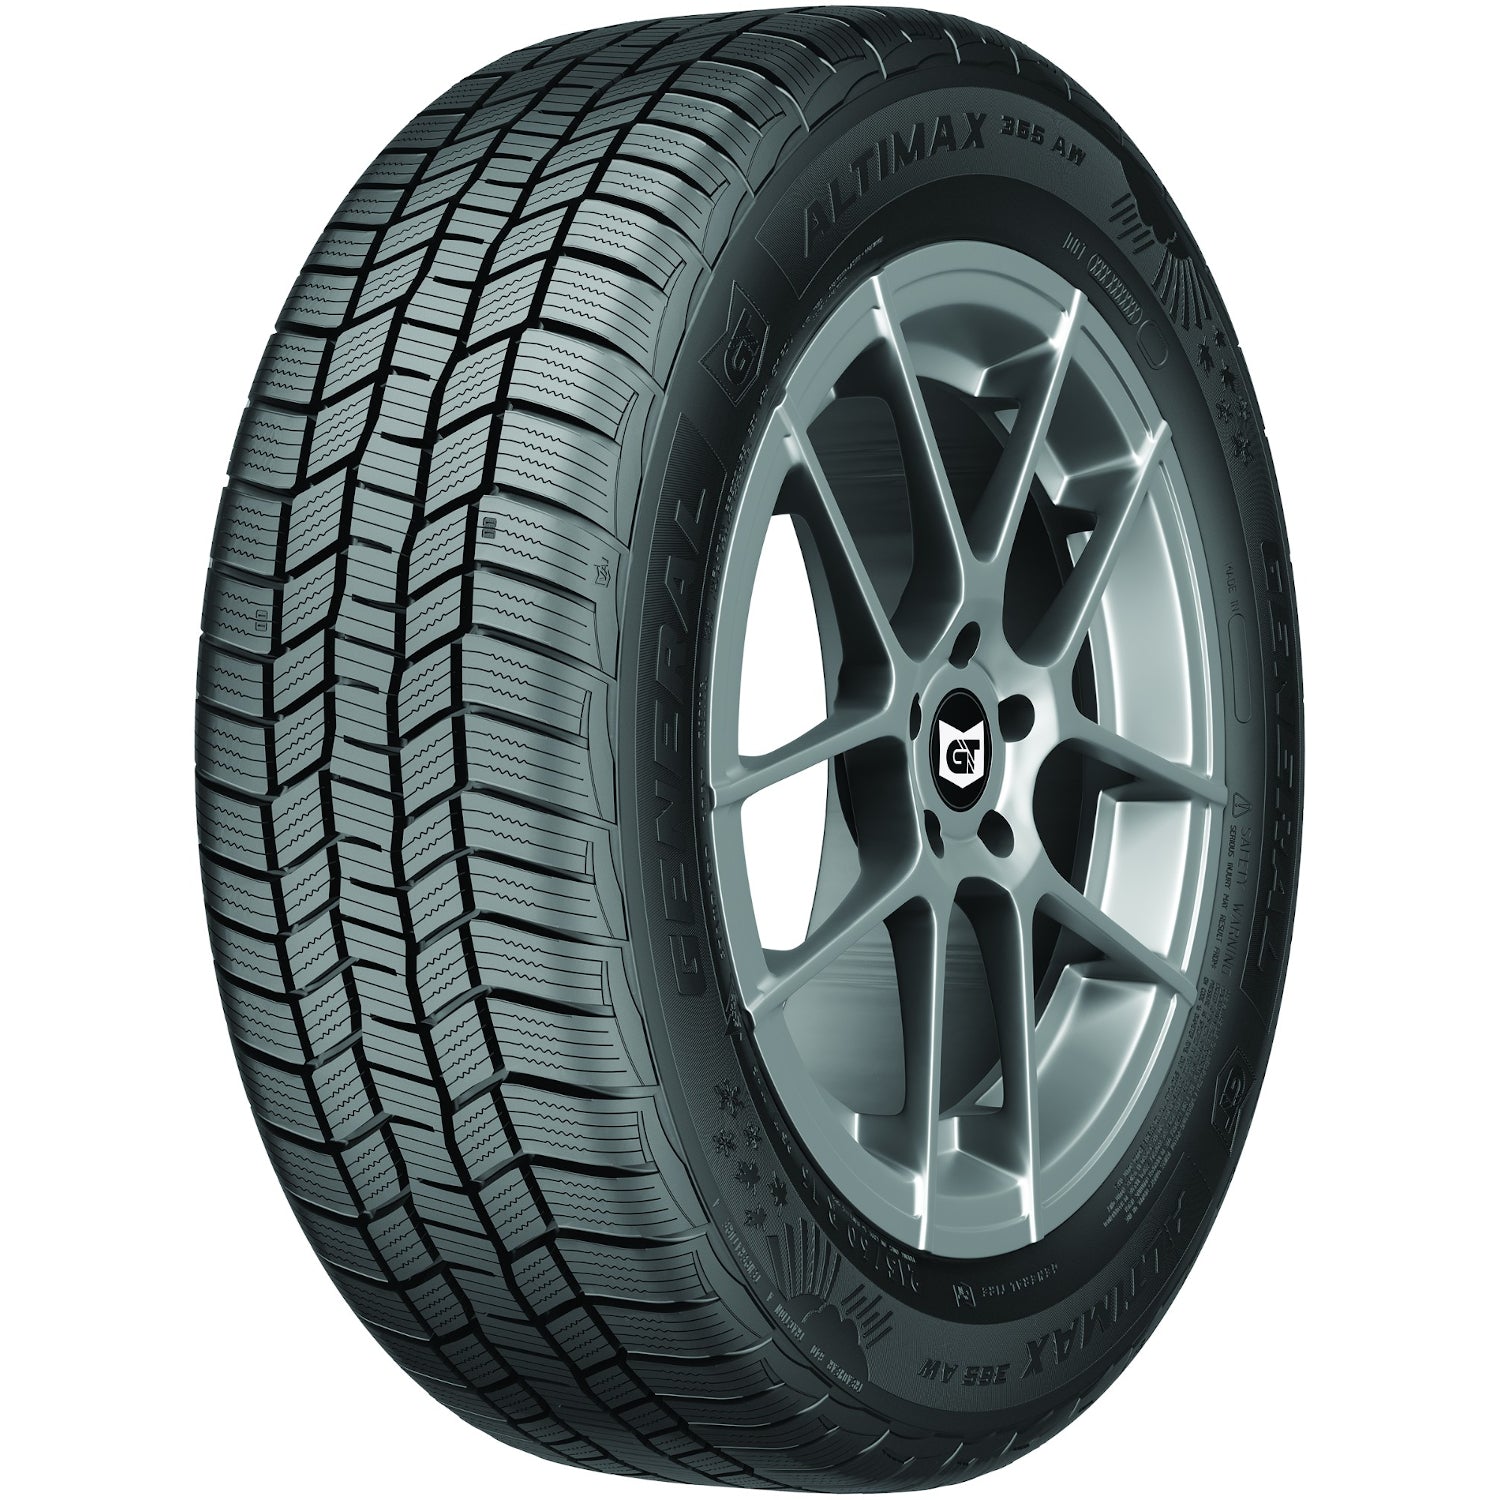 GENERAL ALTIMAX 365AW 235/60R18 (29.1X9.3R 18) Tires